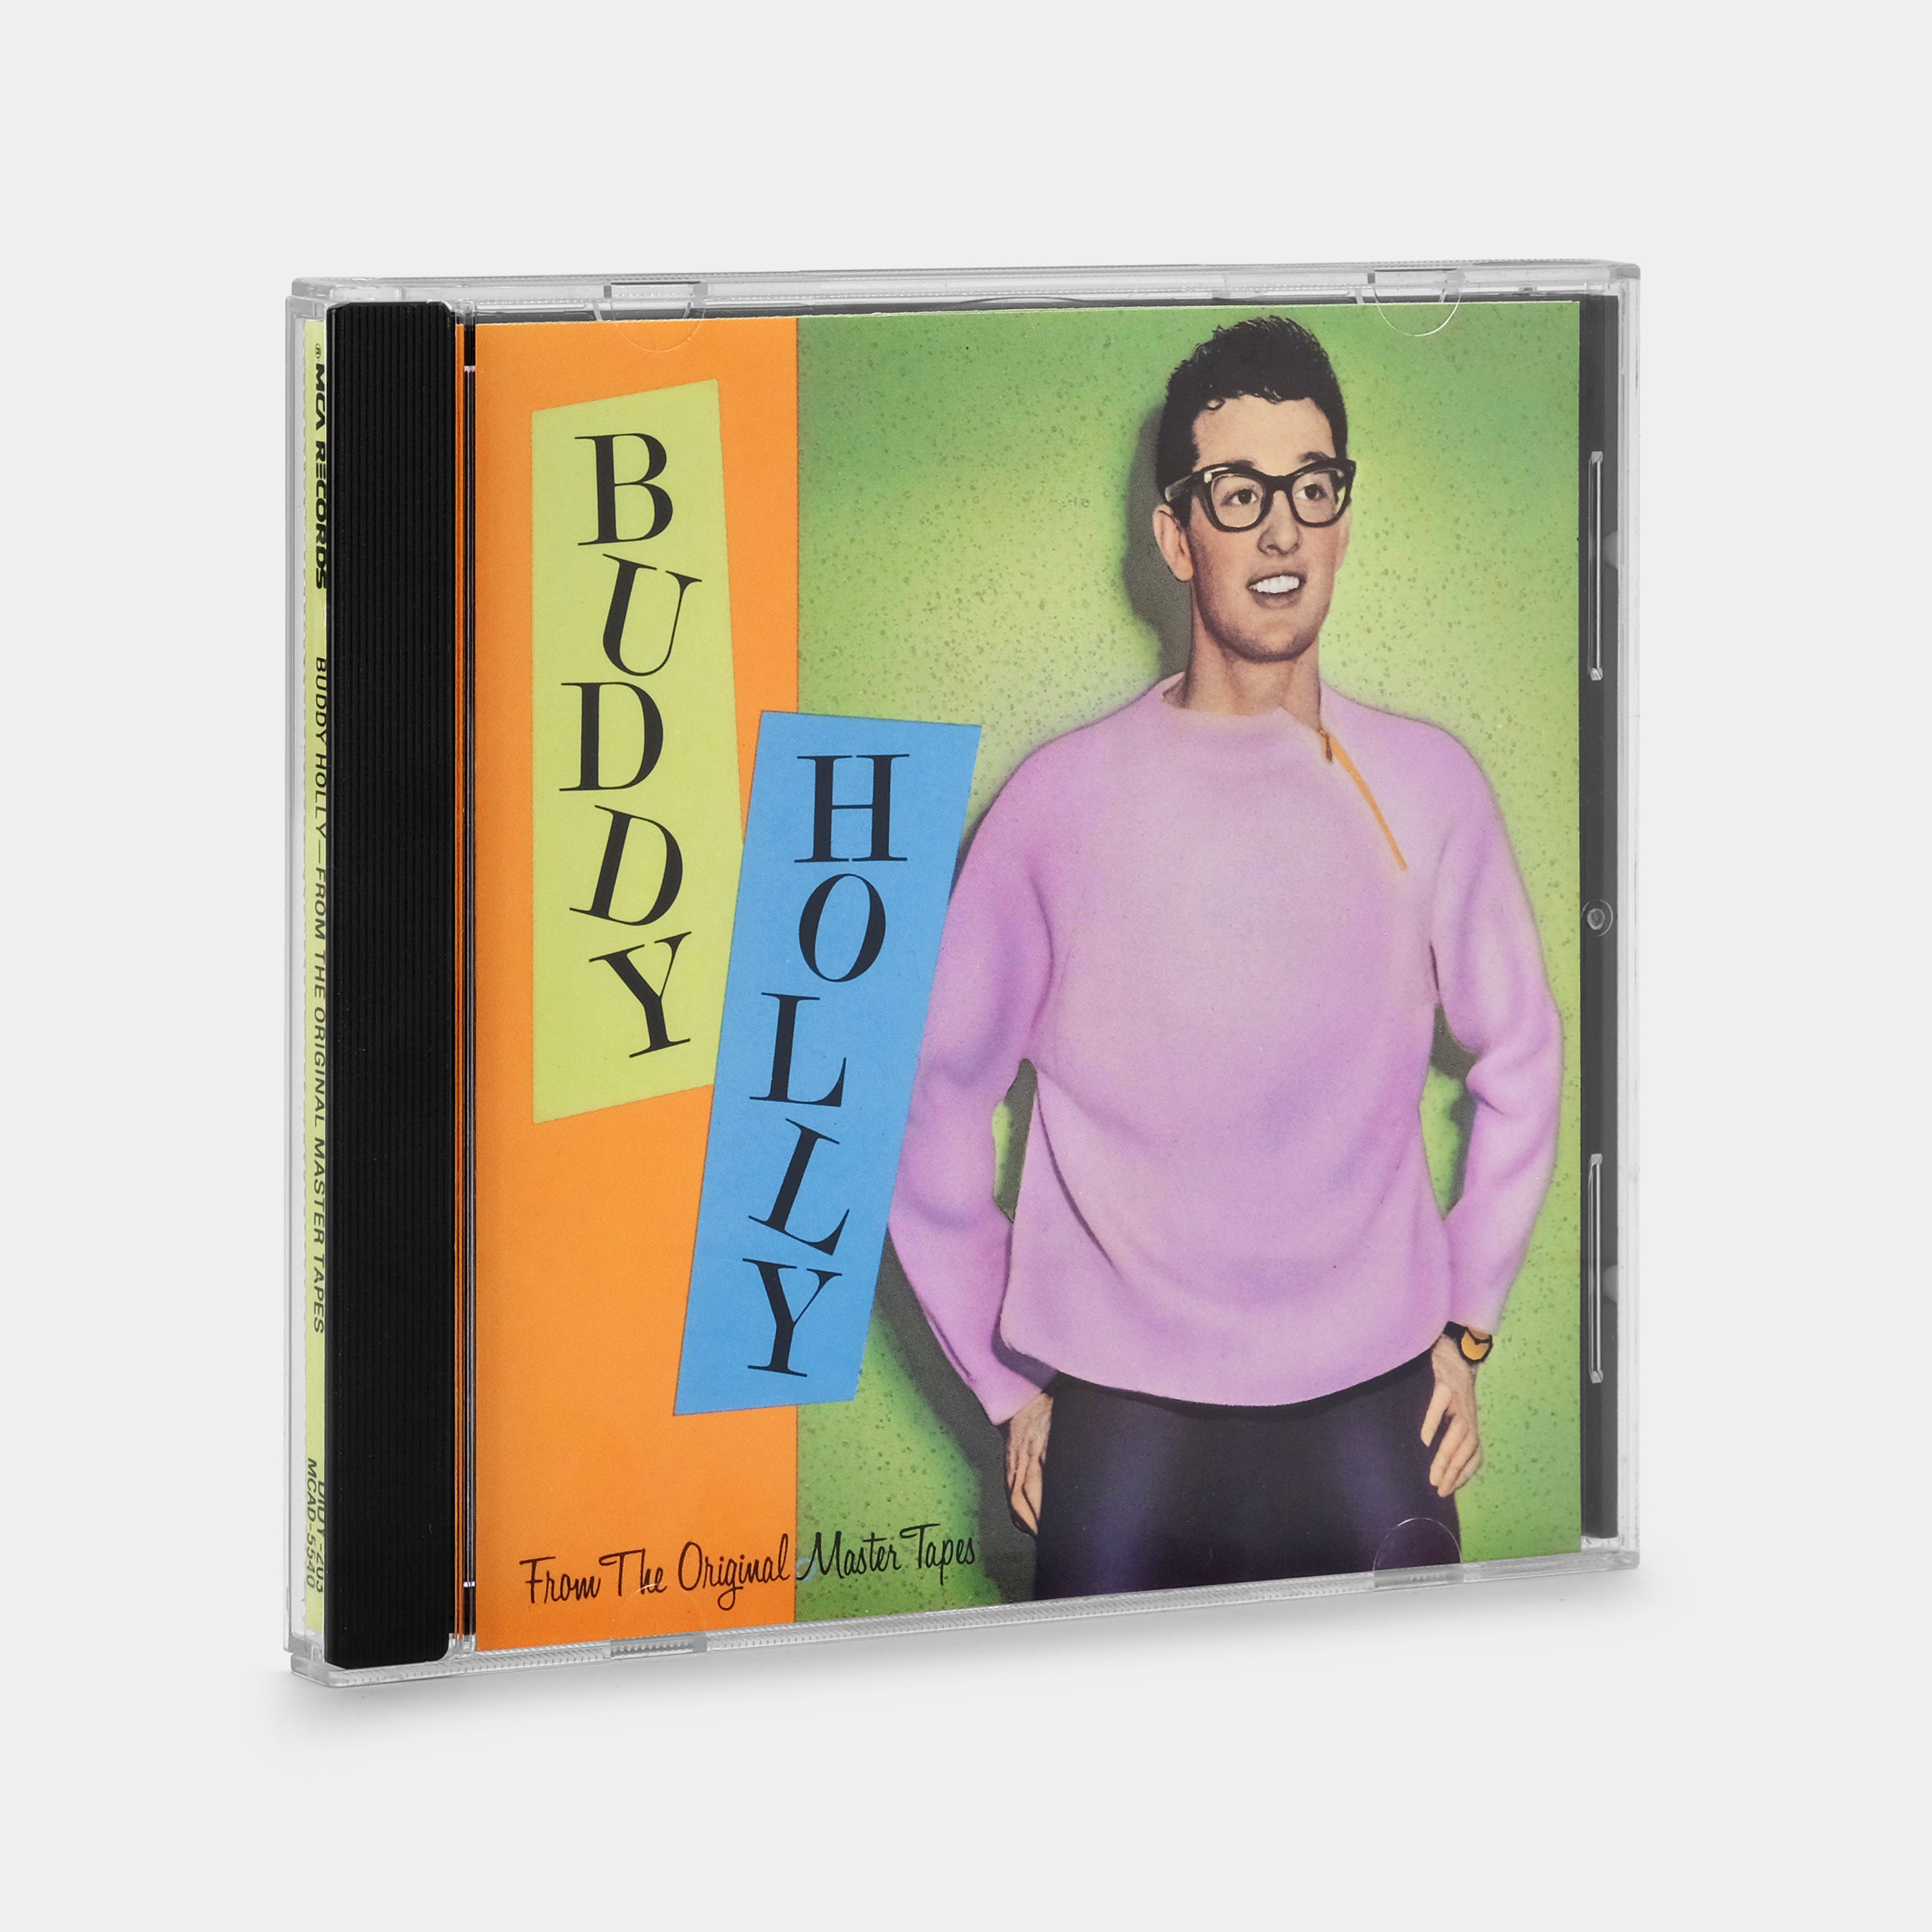 Buddy Holly - From The Original Master Tapes CD